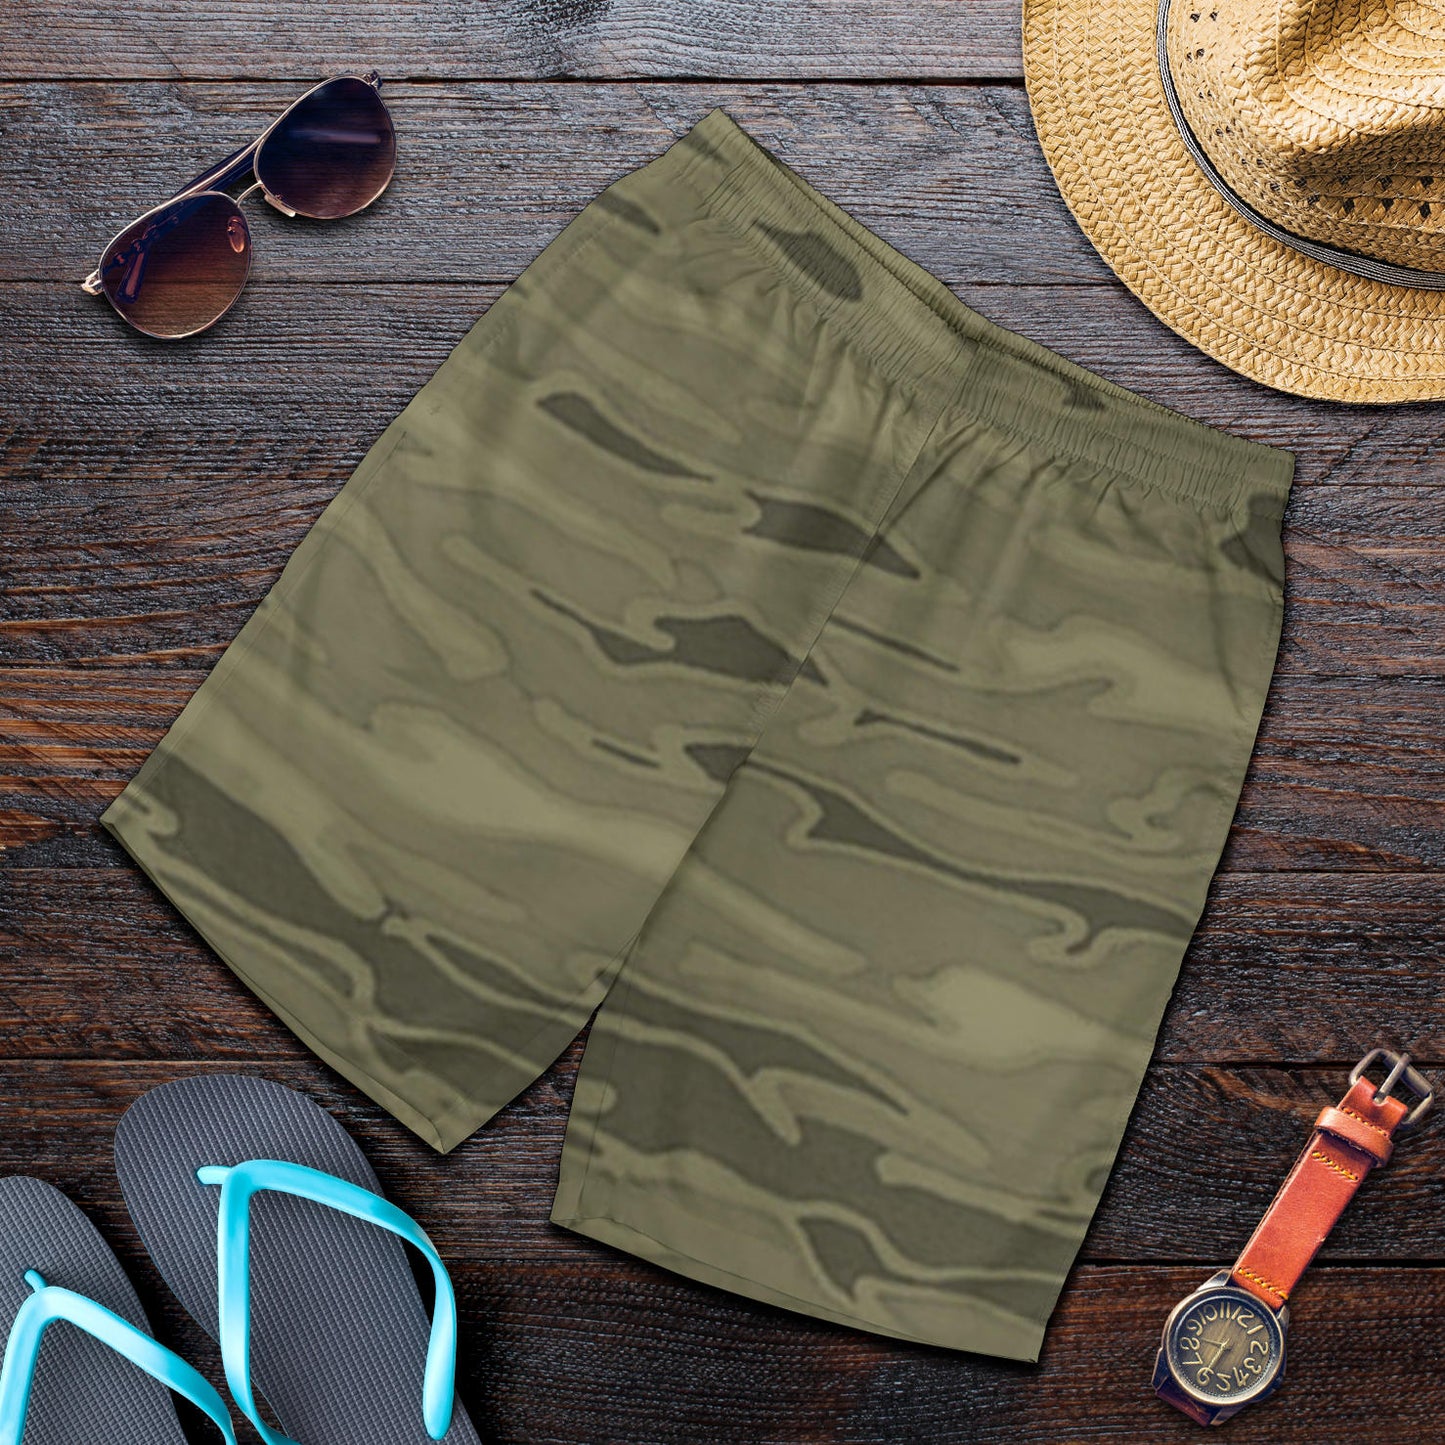 Green Army Camouflage Mens Shorts